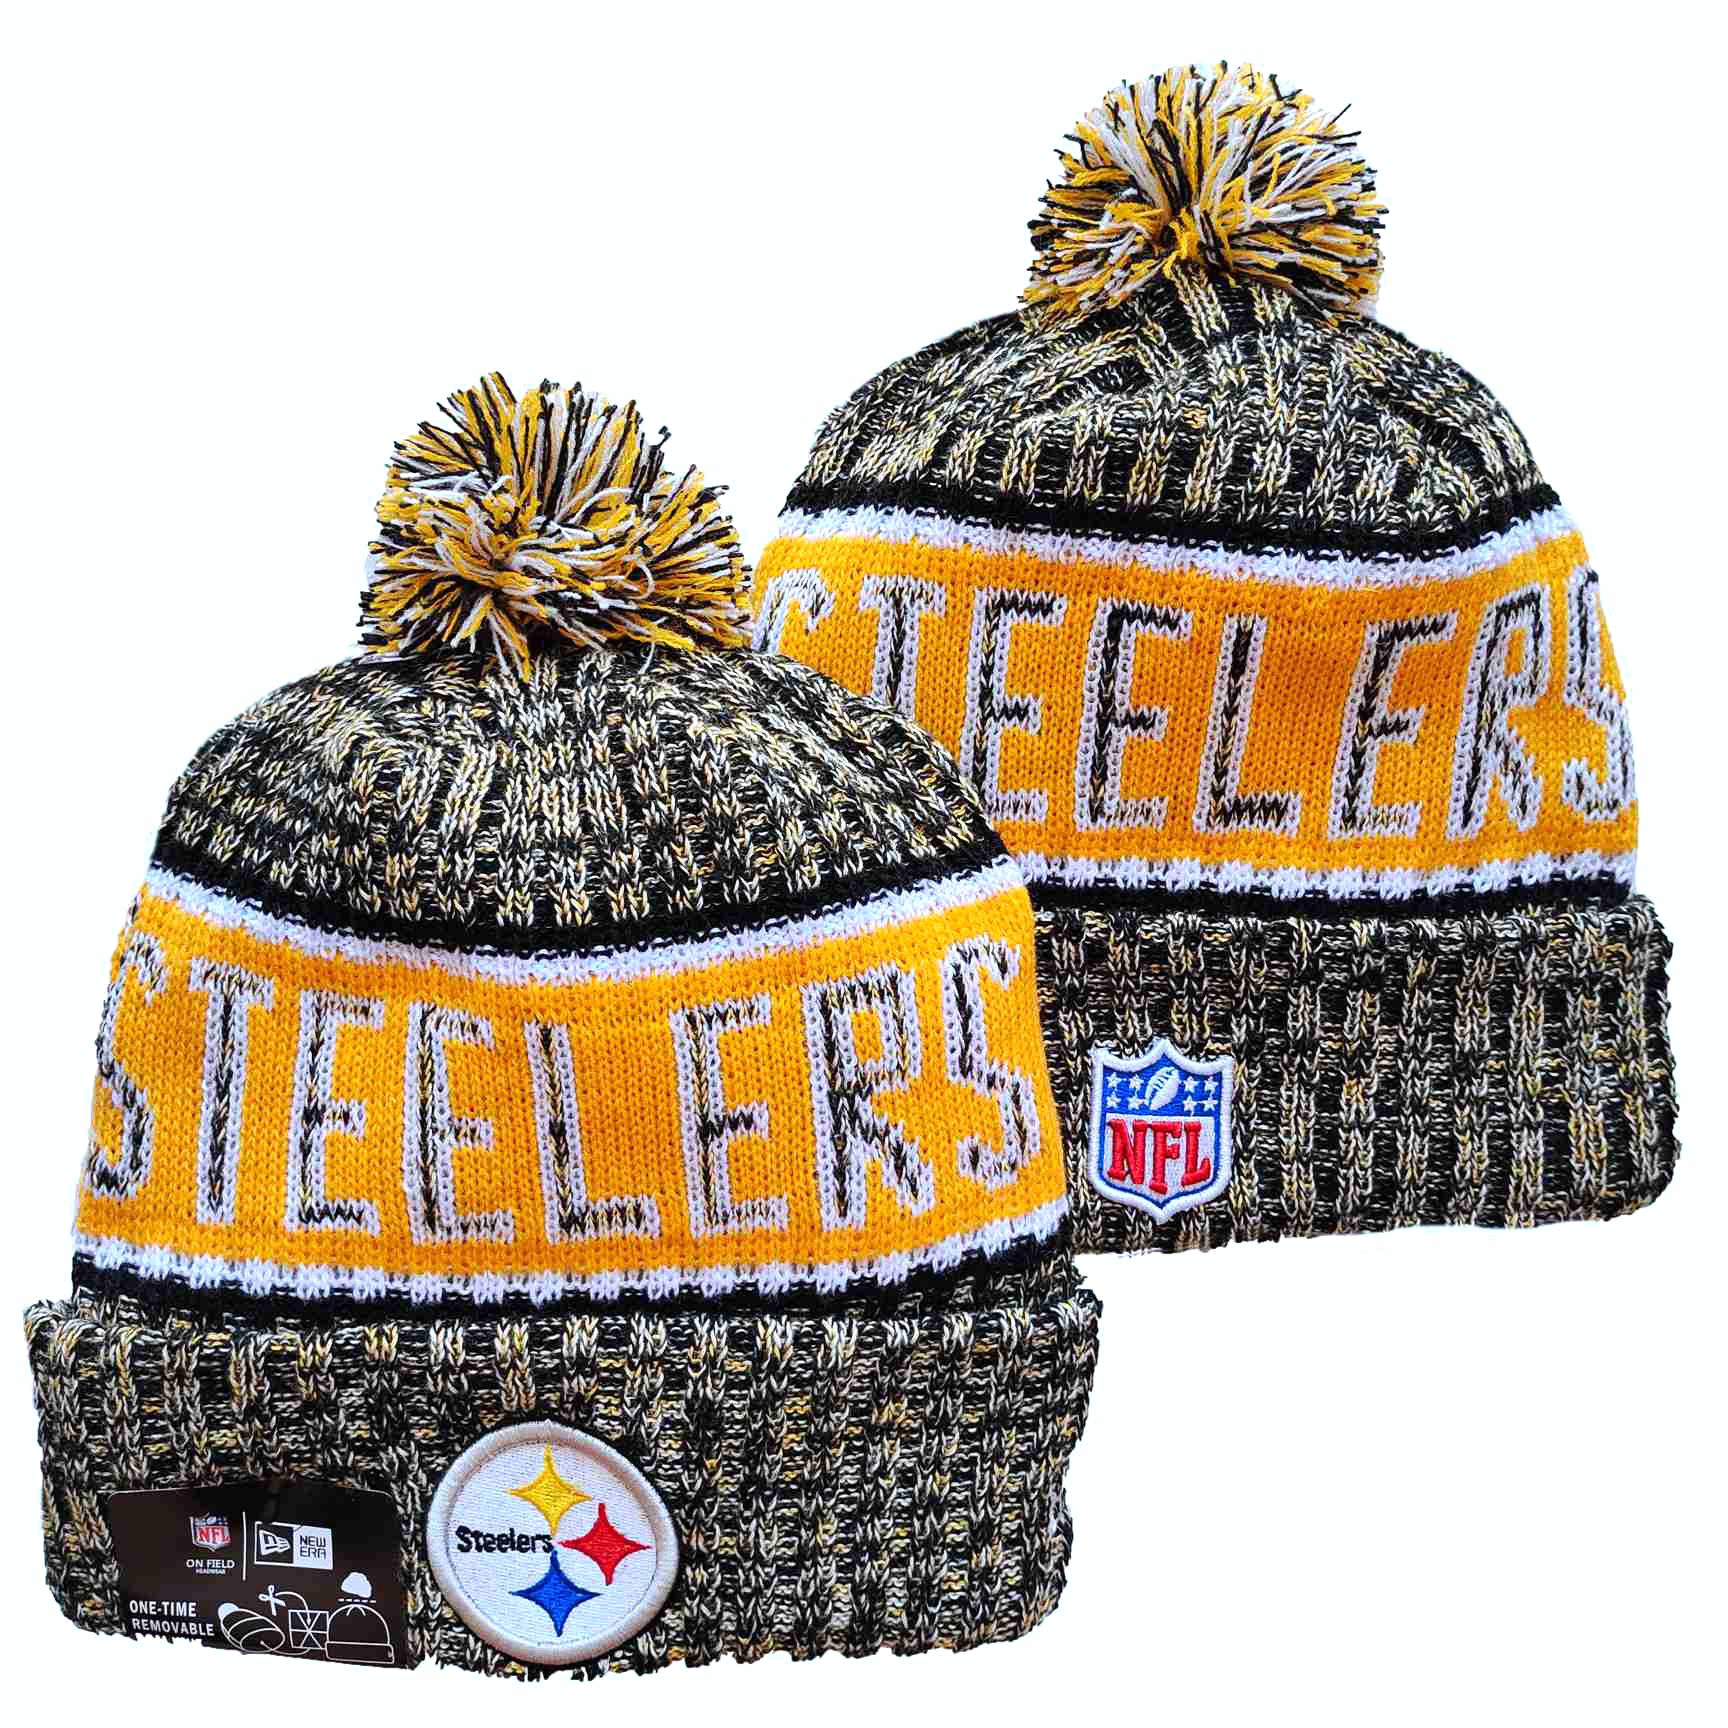 NFL Pittsburgh Steelers Beanies Knit Hats-YD1167